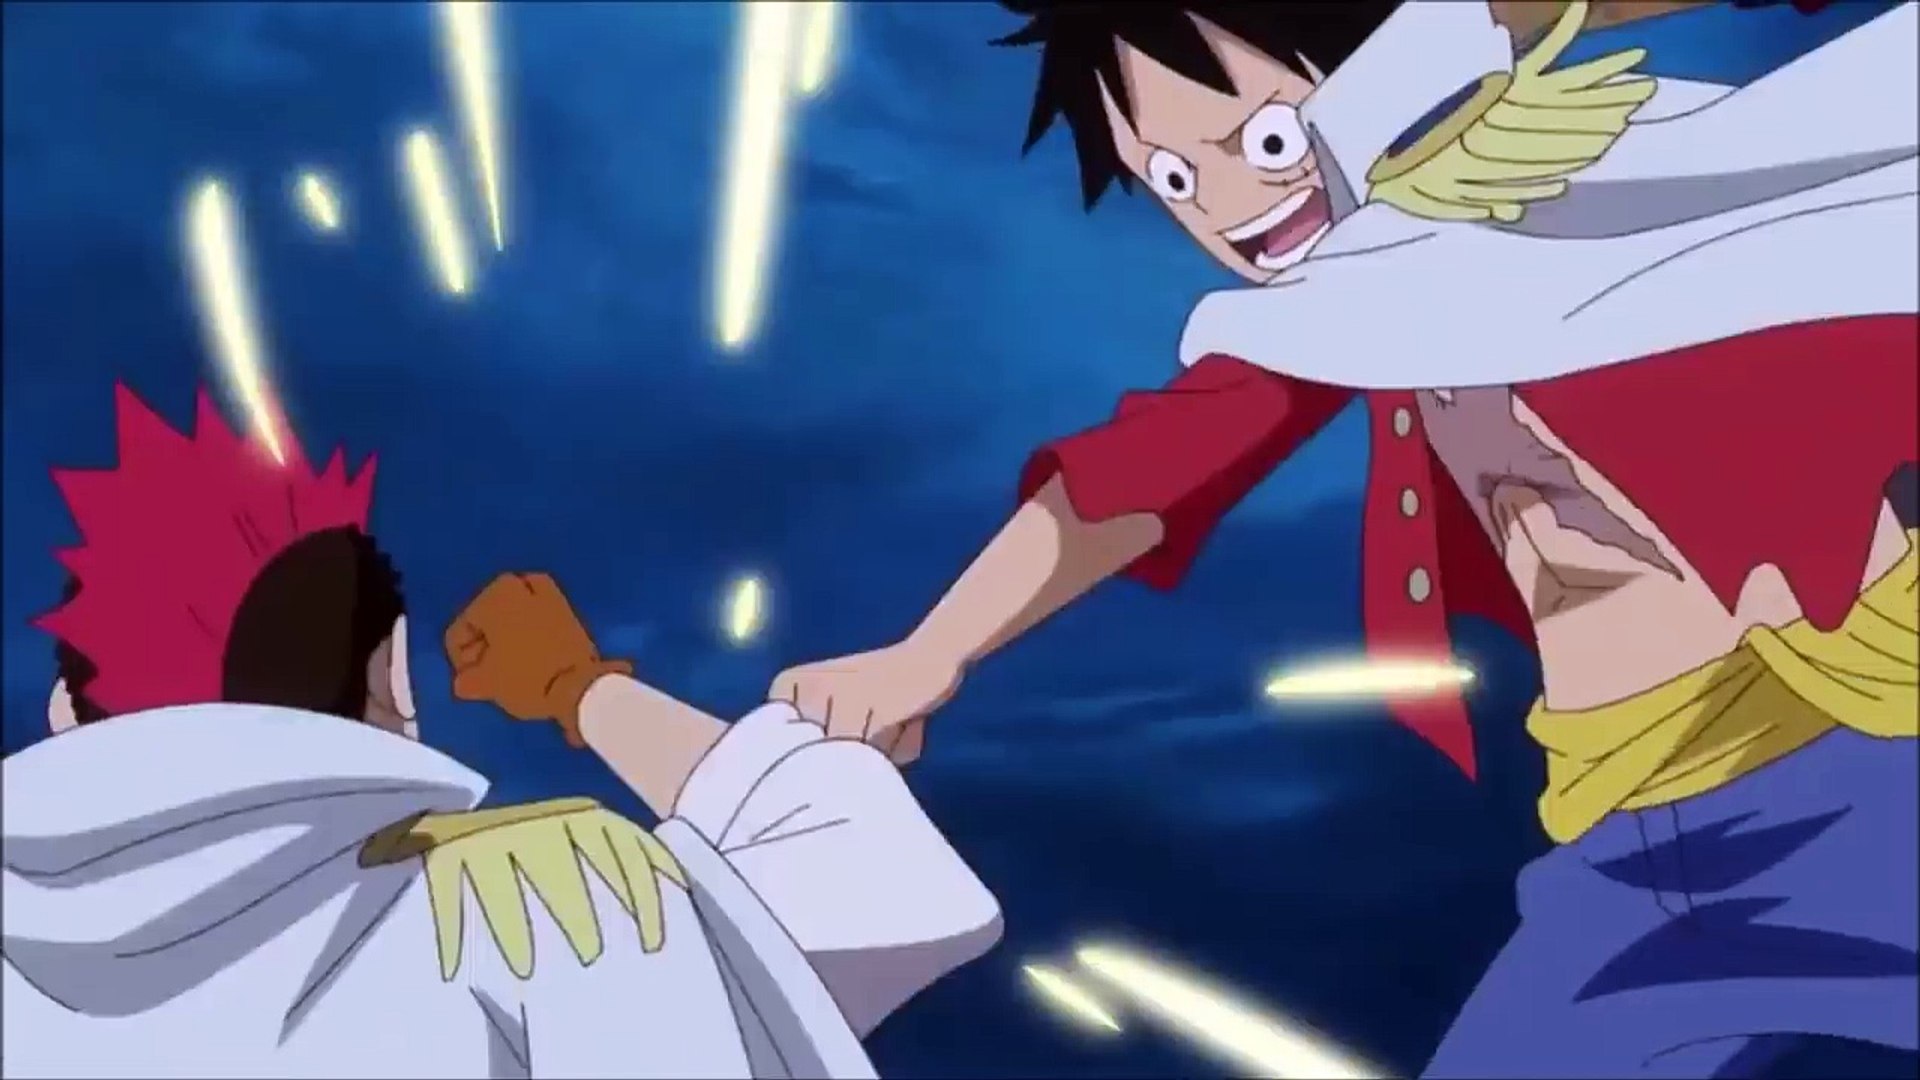 Luffy Destroys Aokijis Discipe Grount One Piece Hd Ep 781 Subbed Video Dailymotion